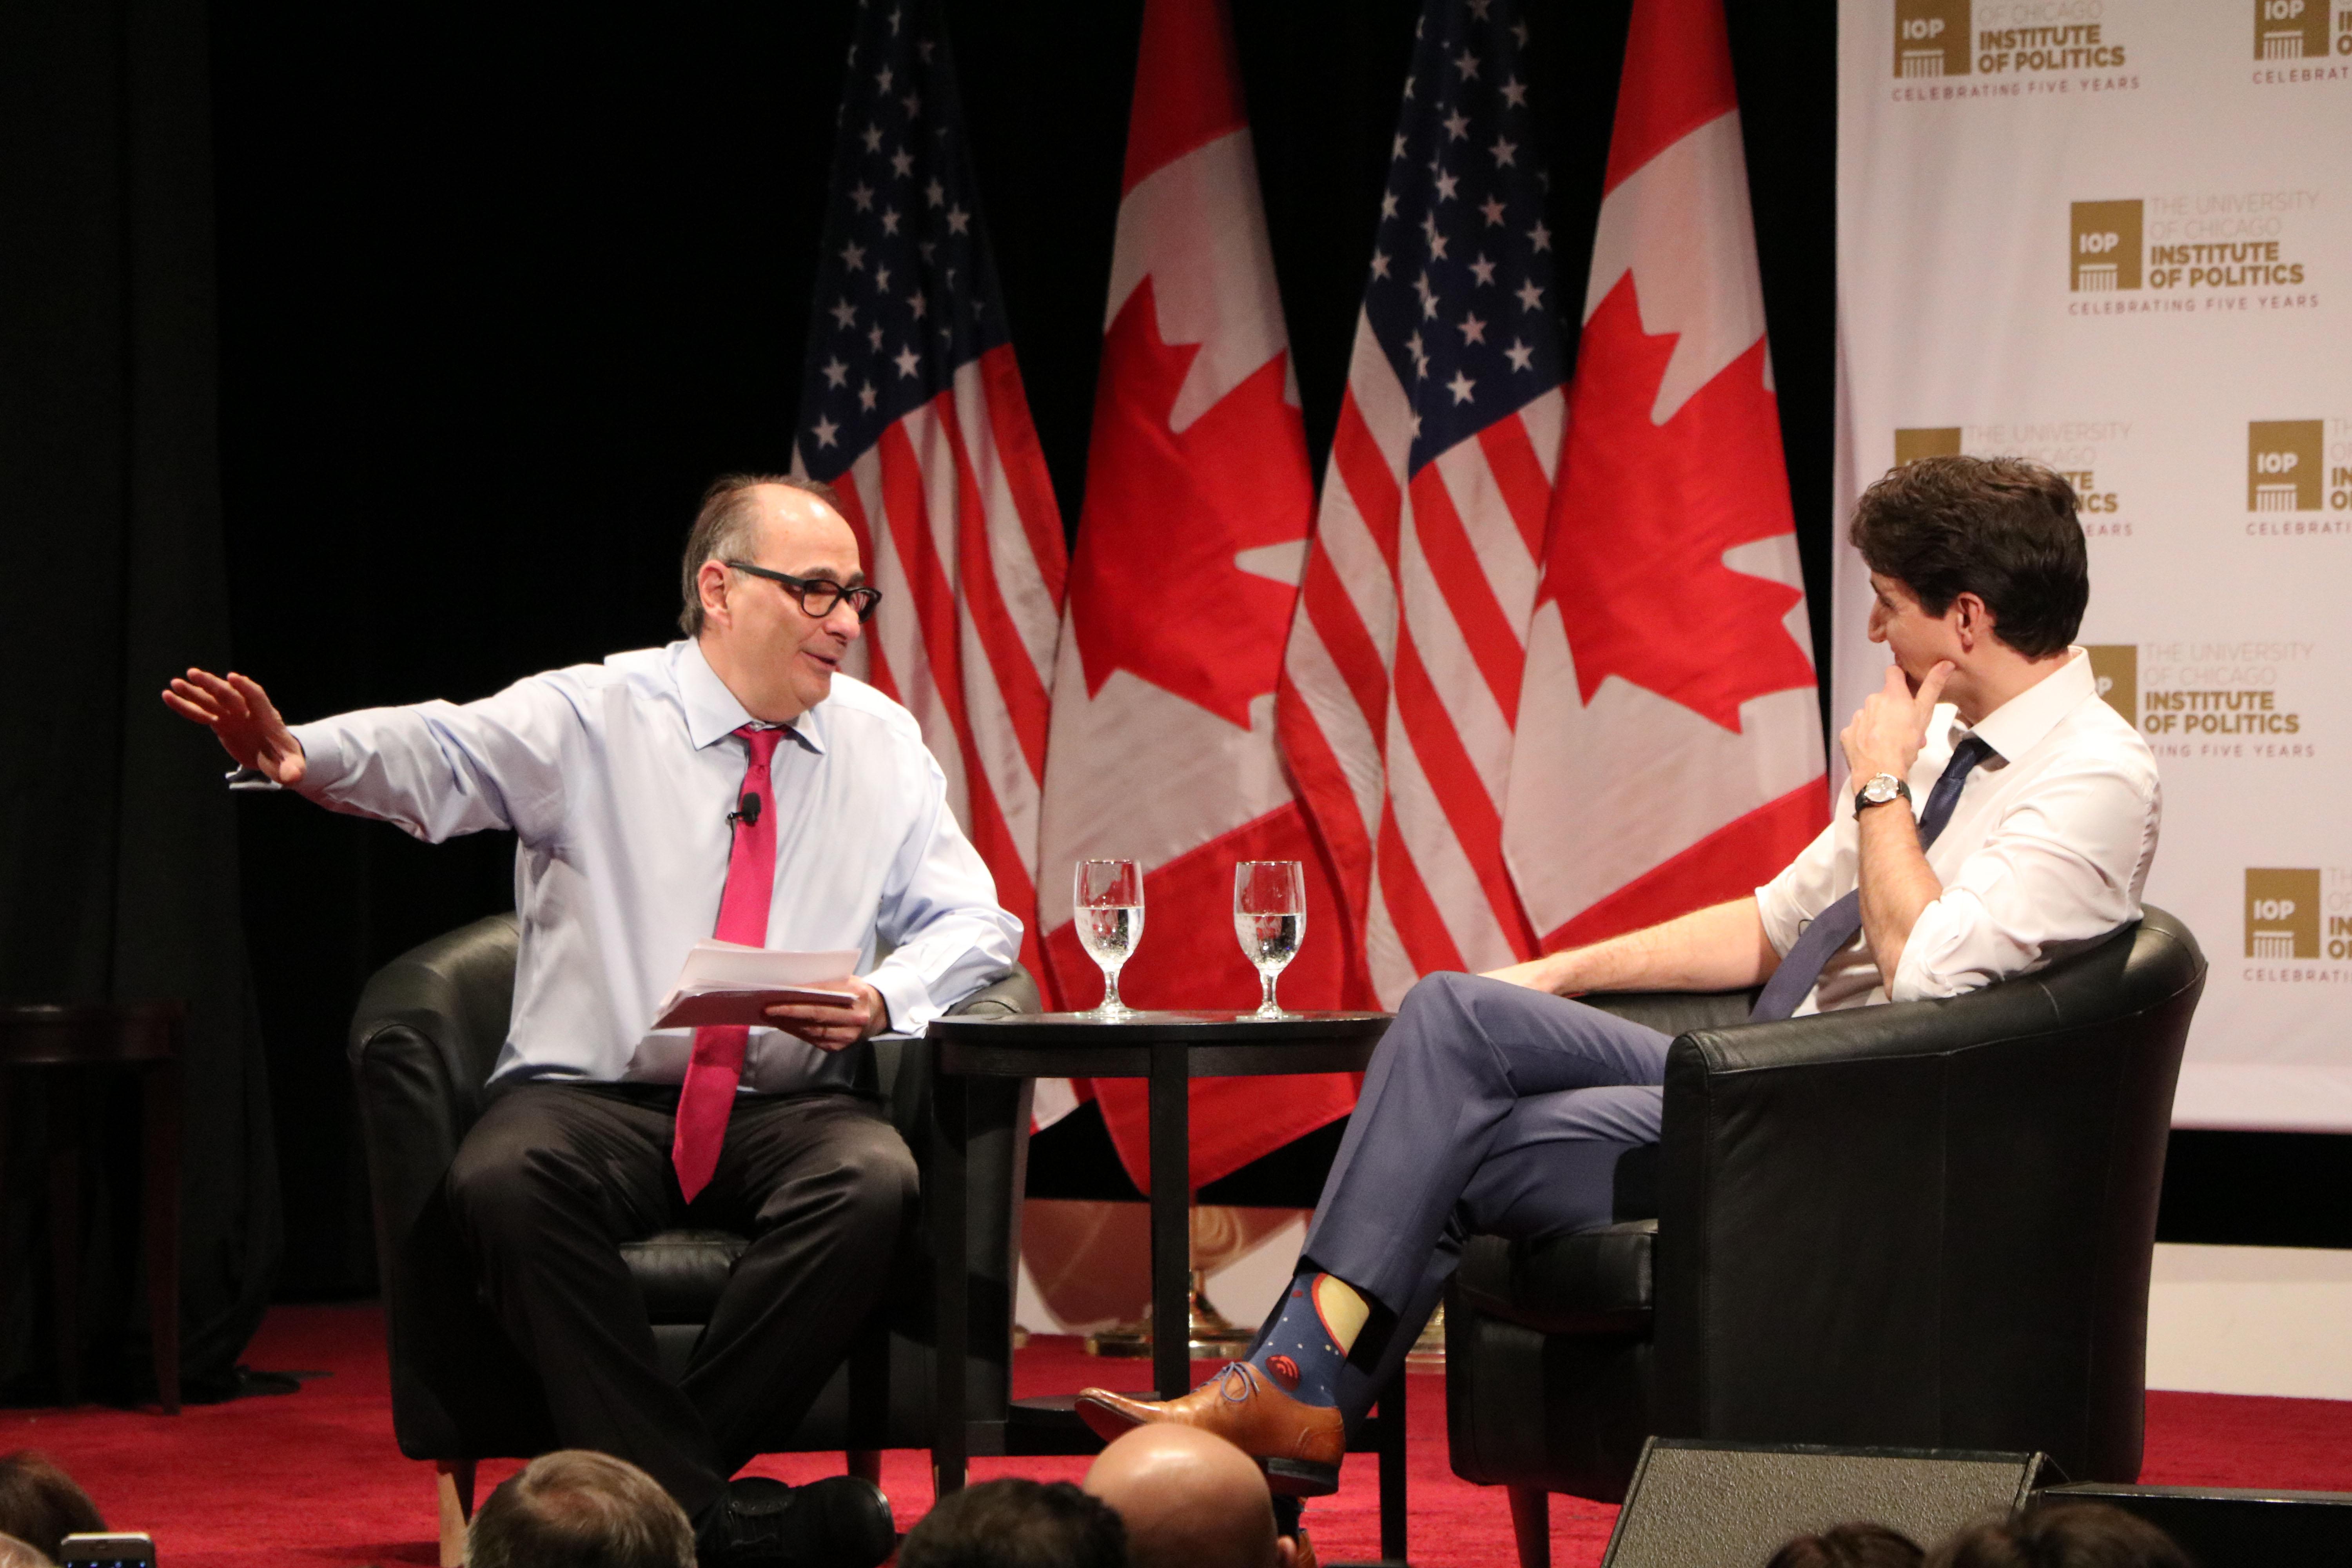 IOP founder and director David Axelrod asks Trudeau a question. (Evan Garcia / Chicago Tonight)